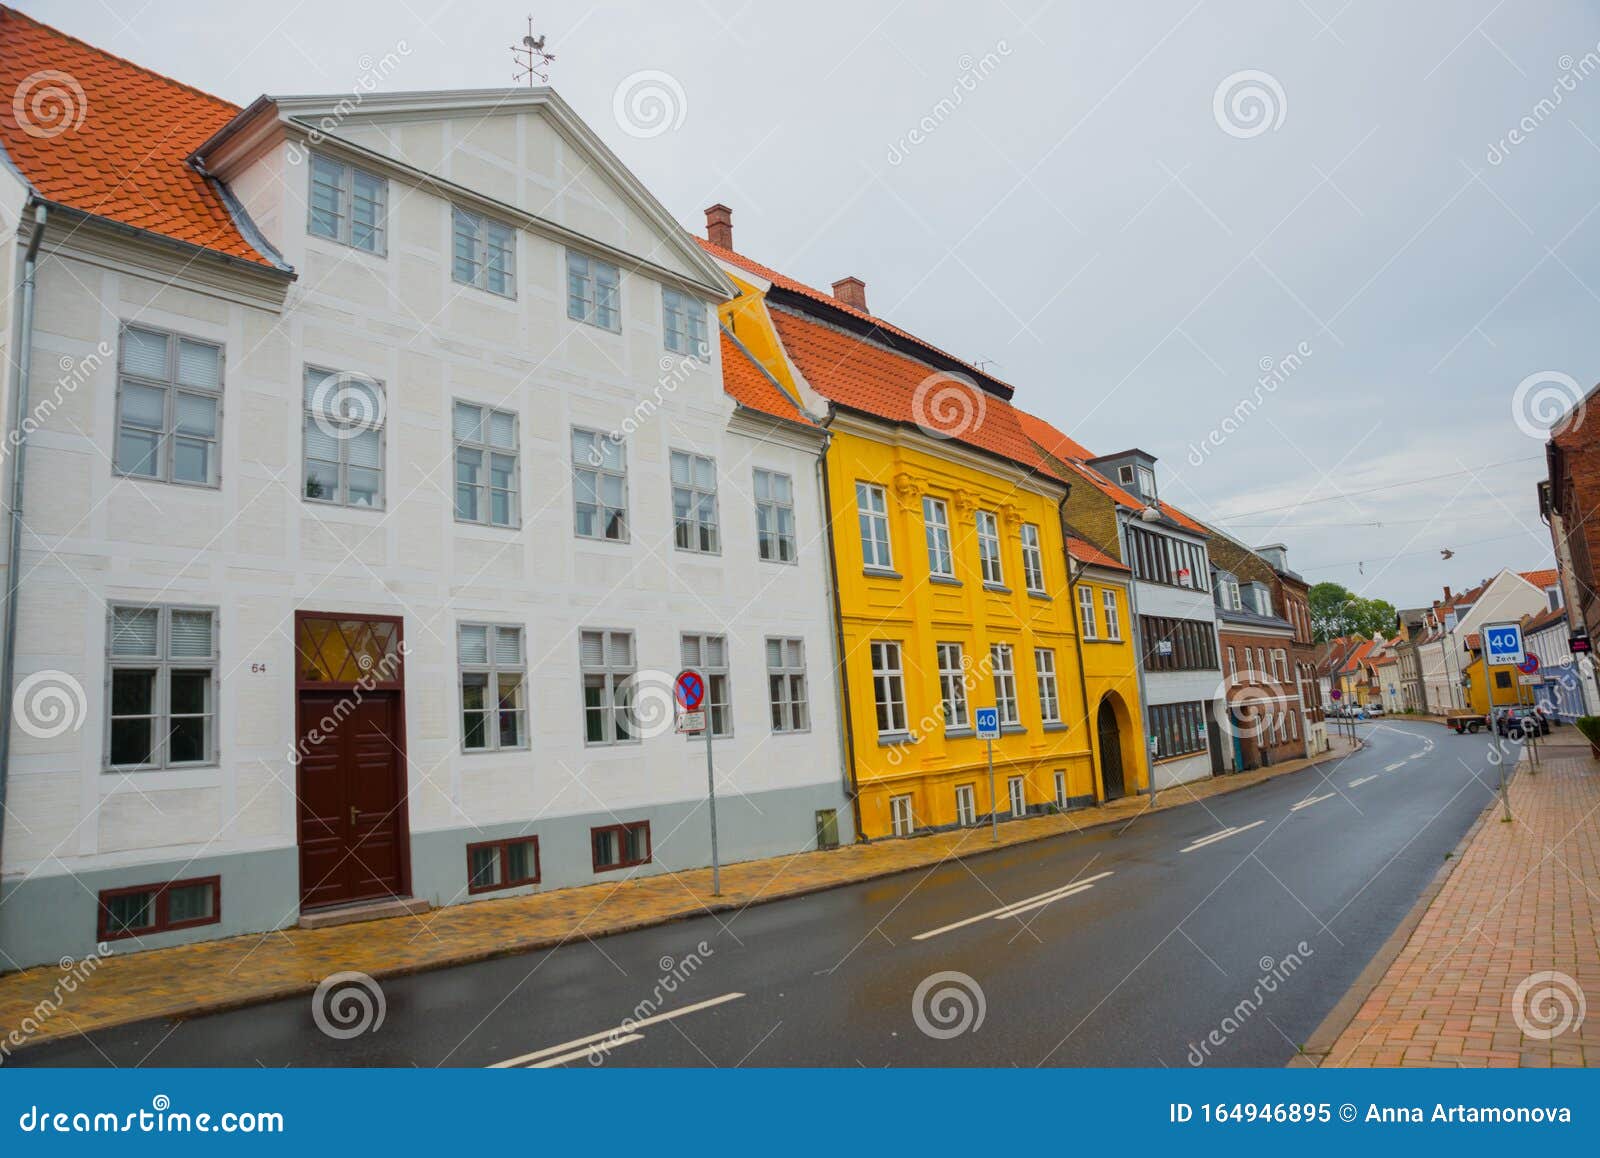 Odense Denmark Traditional Historic House In Odense Denmark Hc Andersen S Hometown Facade On A House In Odense Editorial Image Image Of Attraction Historic